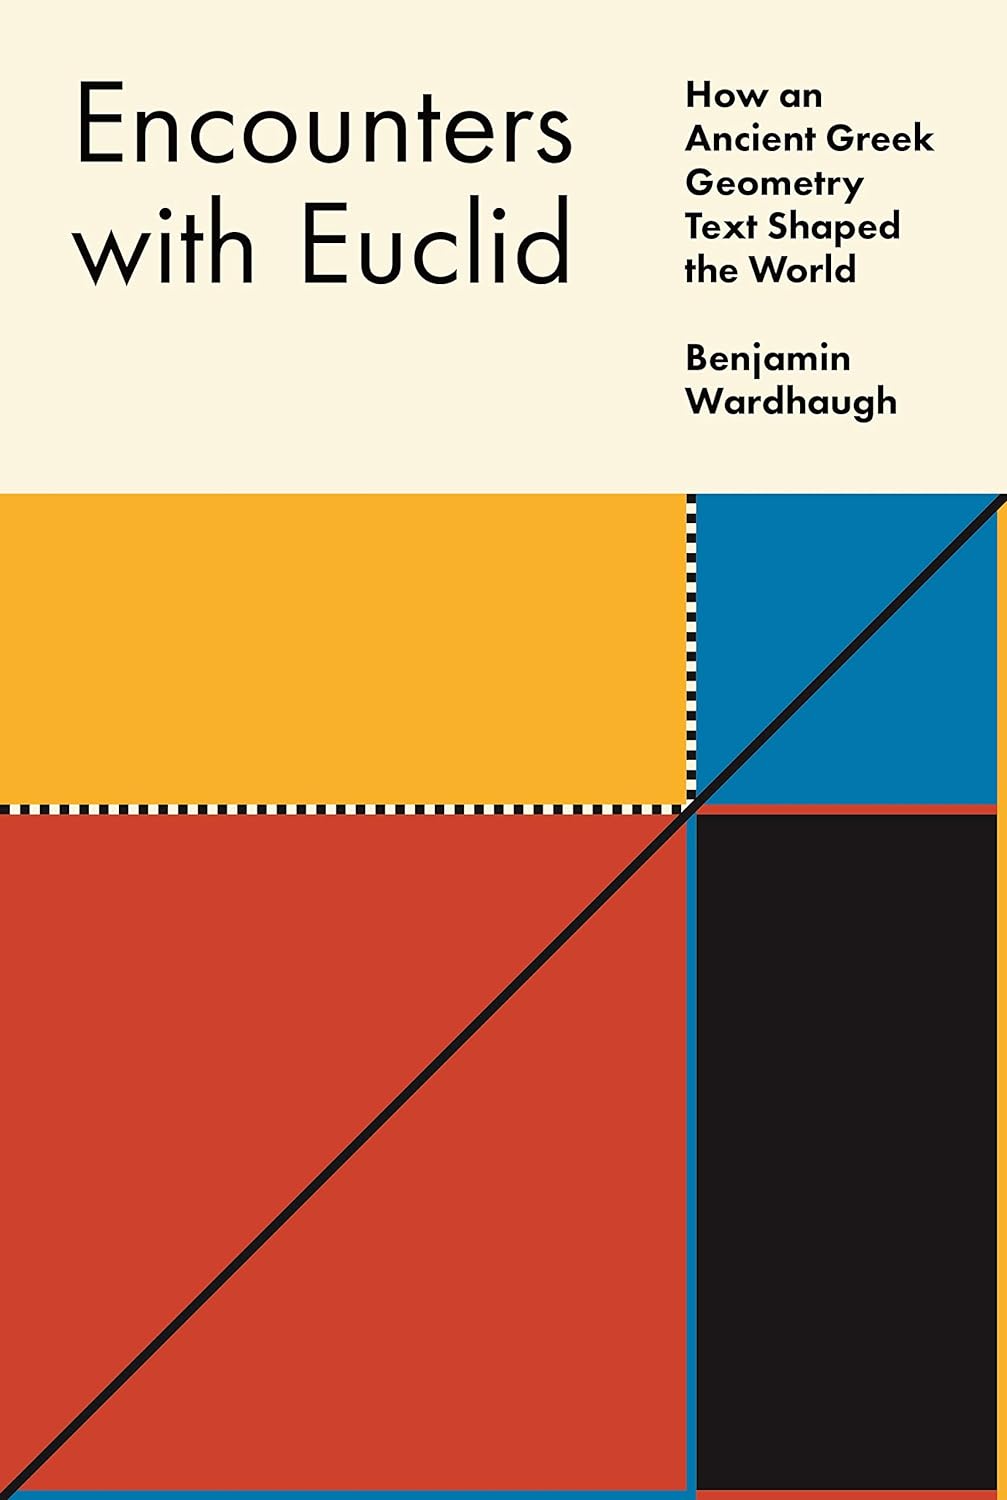 &lt;em&gt;Encounters with Euclid: How an Ancient Greek Geometry Text Shaped the World&lt;/em&gt;. By Benjamin Wardhaugh. Courtesy of Princeton University Press.